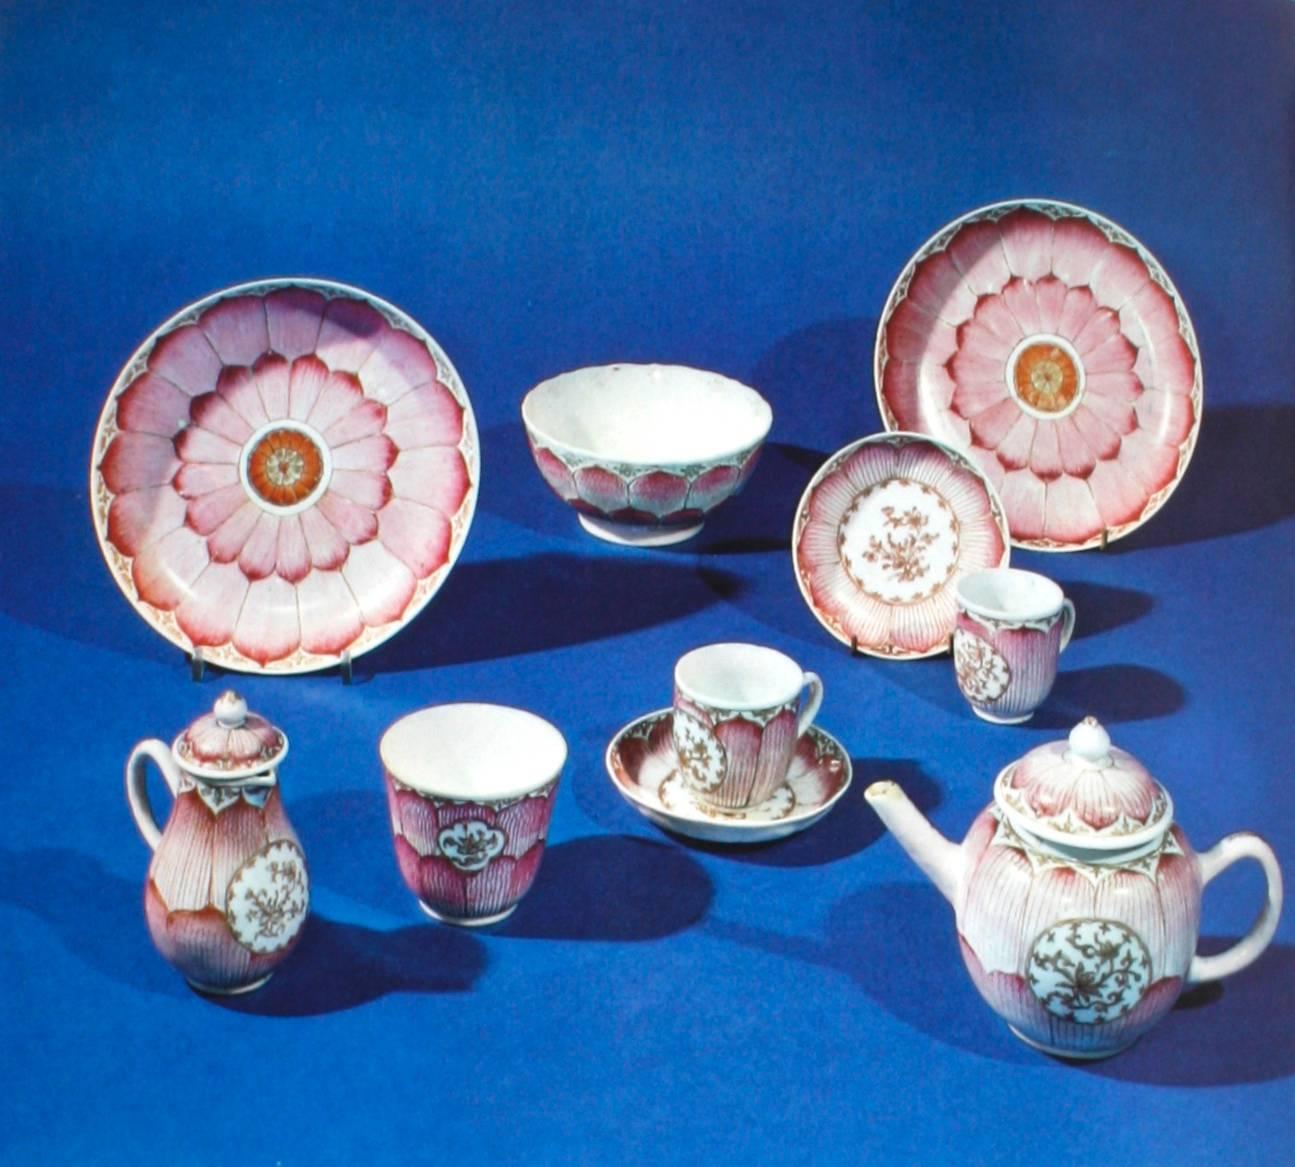 American Collecting Chinese Export Porcelain, First Edition